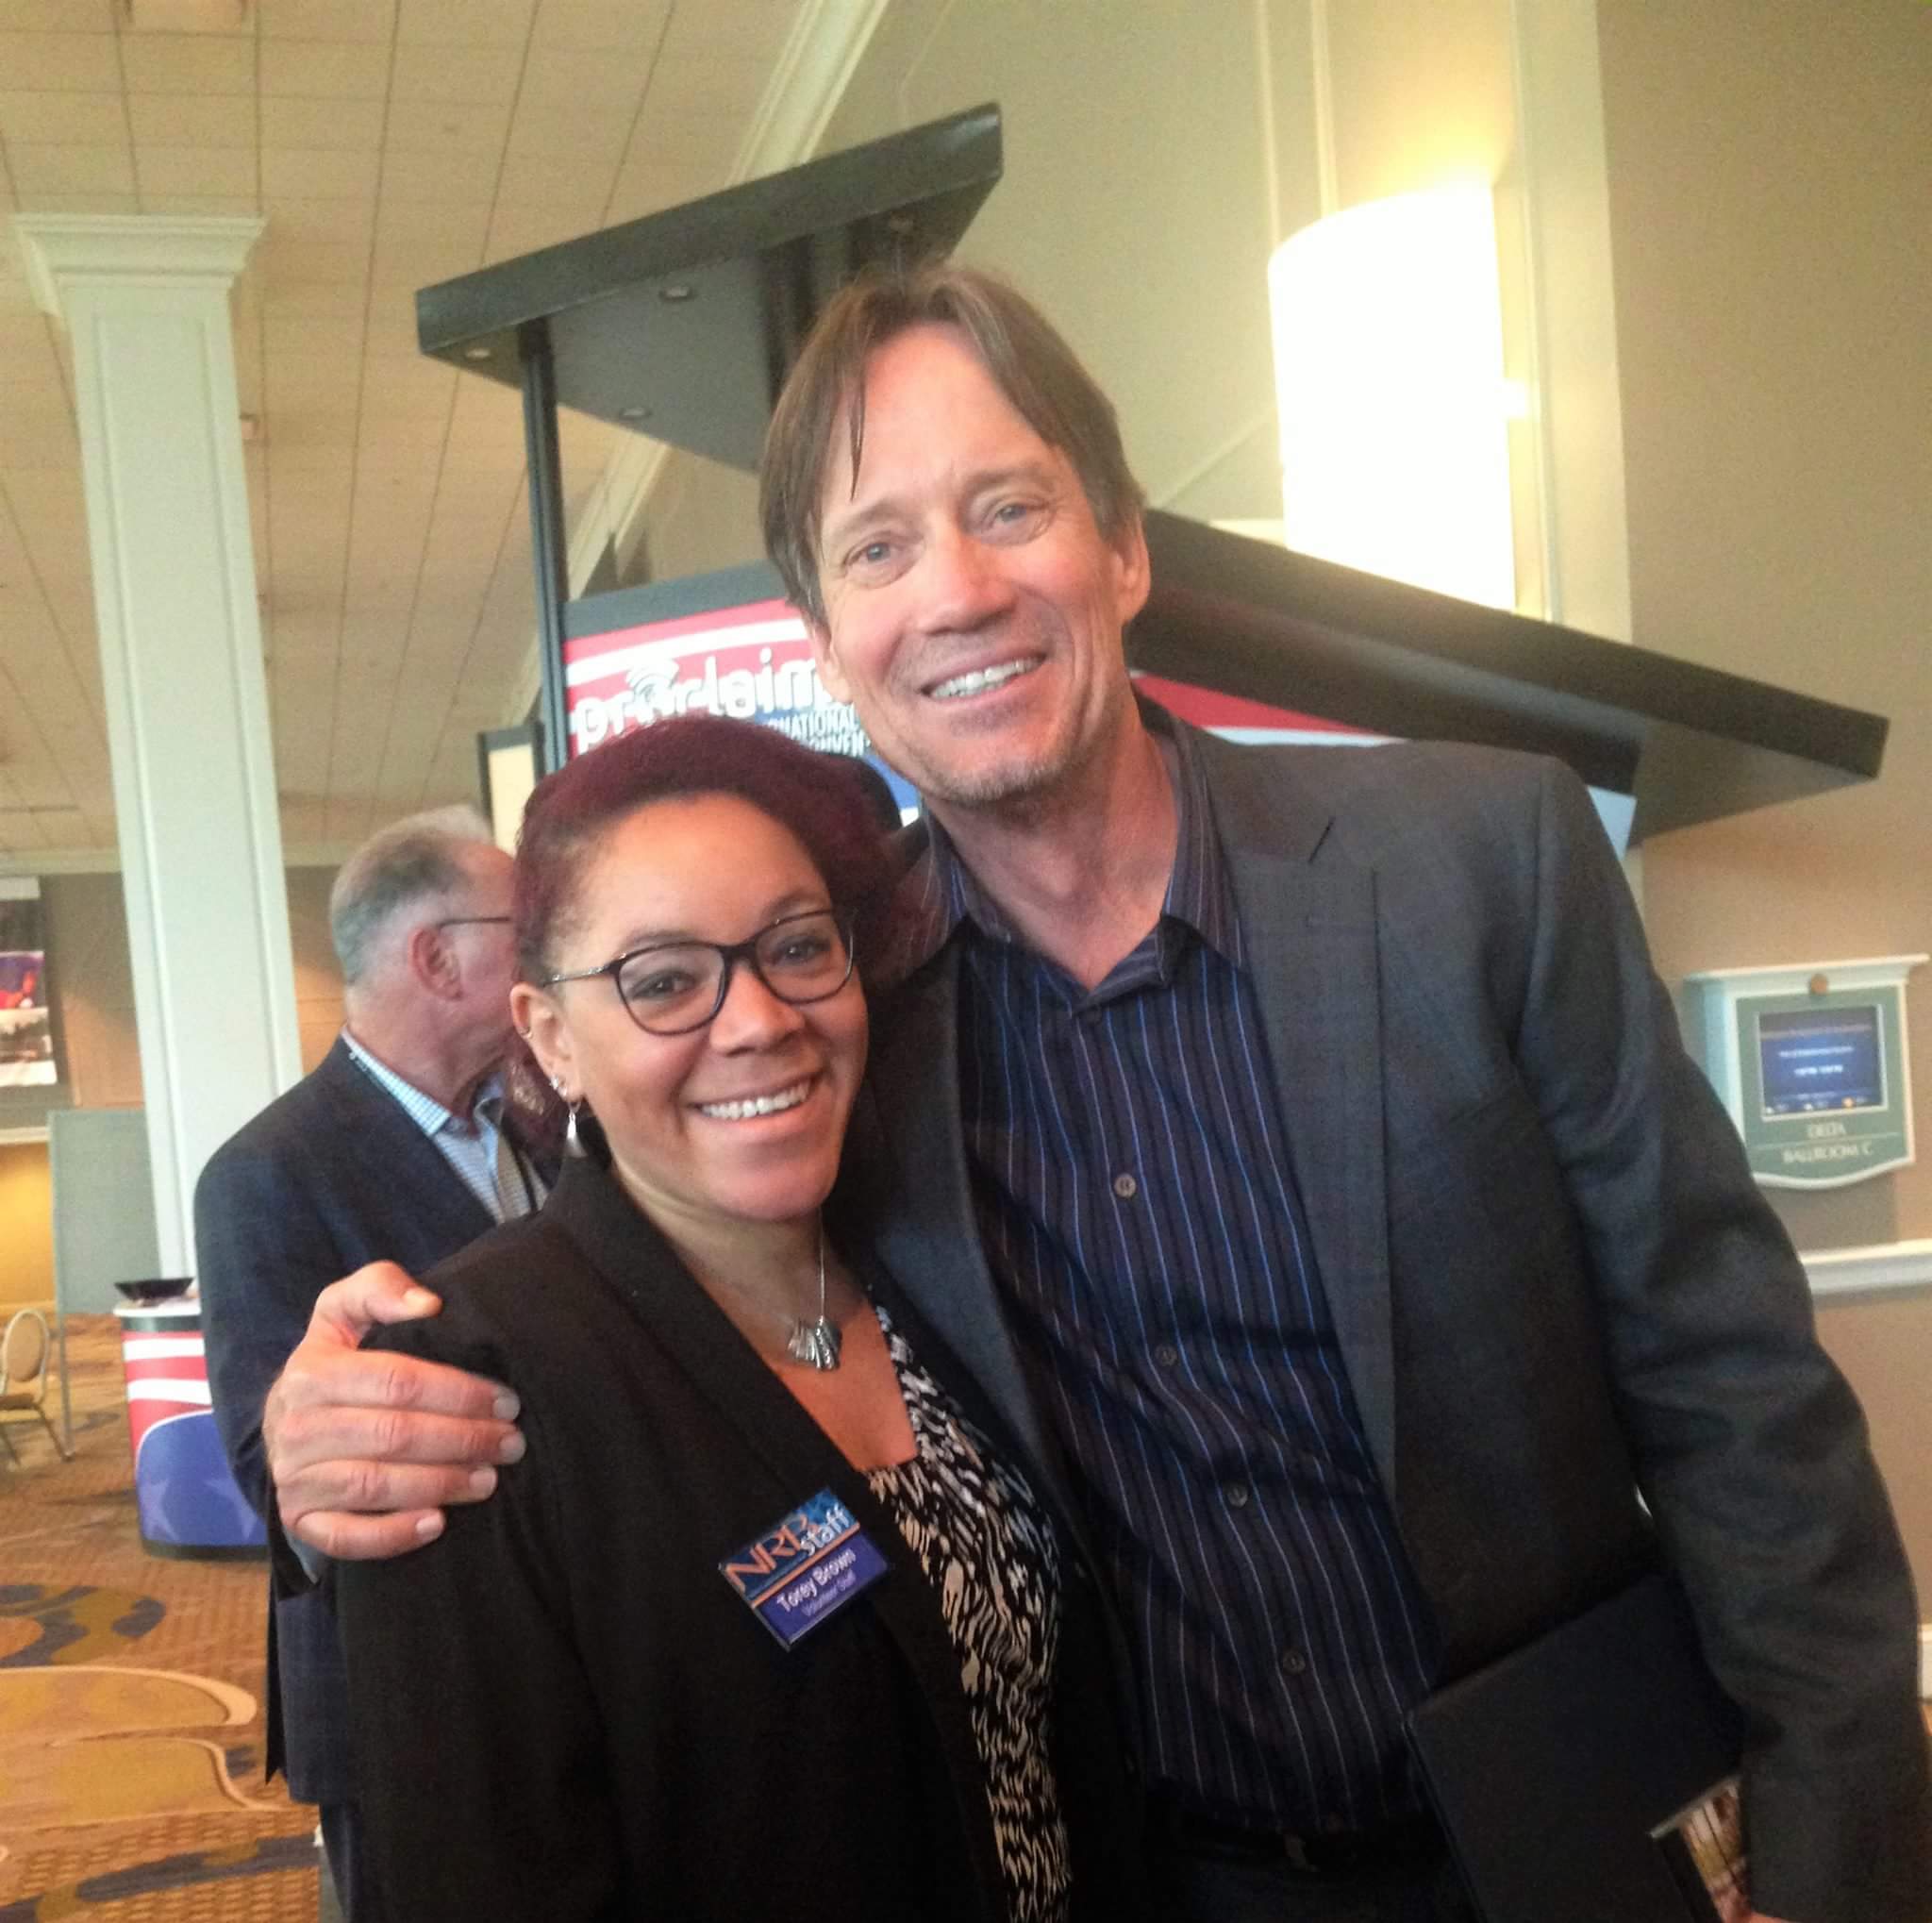 Torey Brown grabs a photo with Kevin Sorbo. Photo courtesy of Torey Brown.